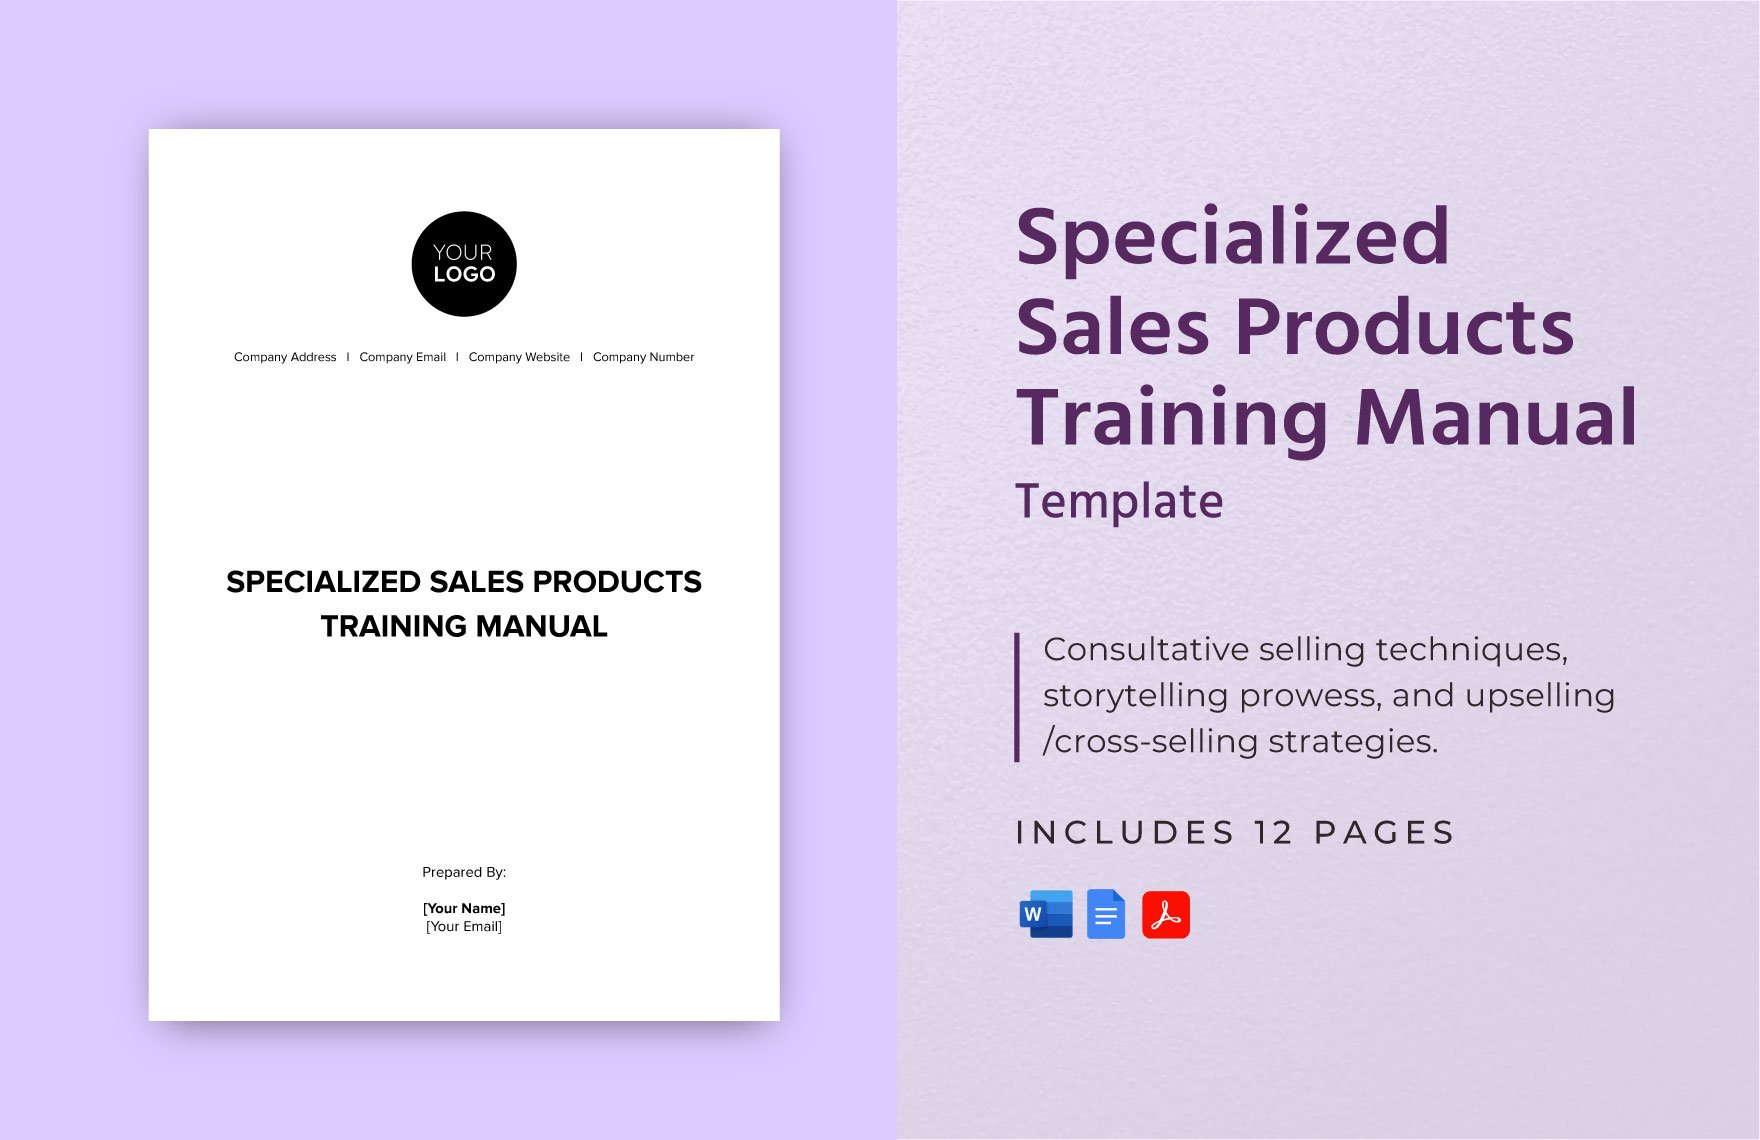 Specialized Sales Products Training Manual Template in Word, Google Docs, PDF